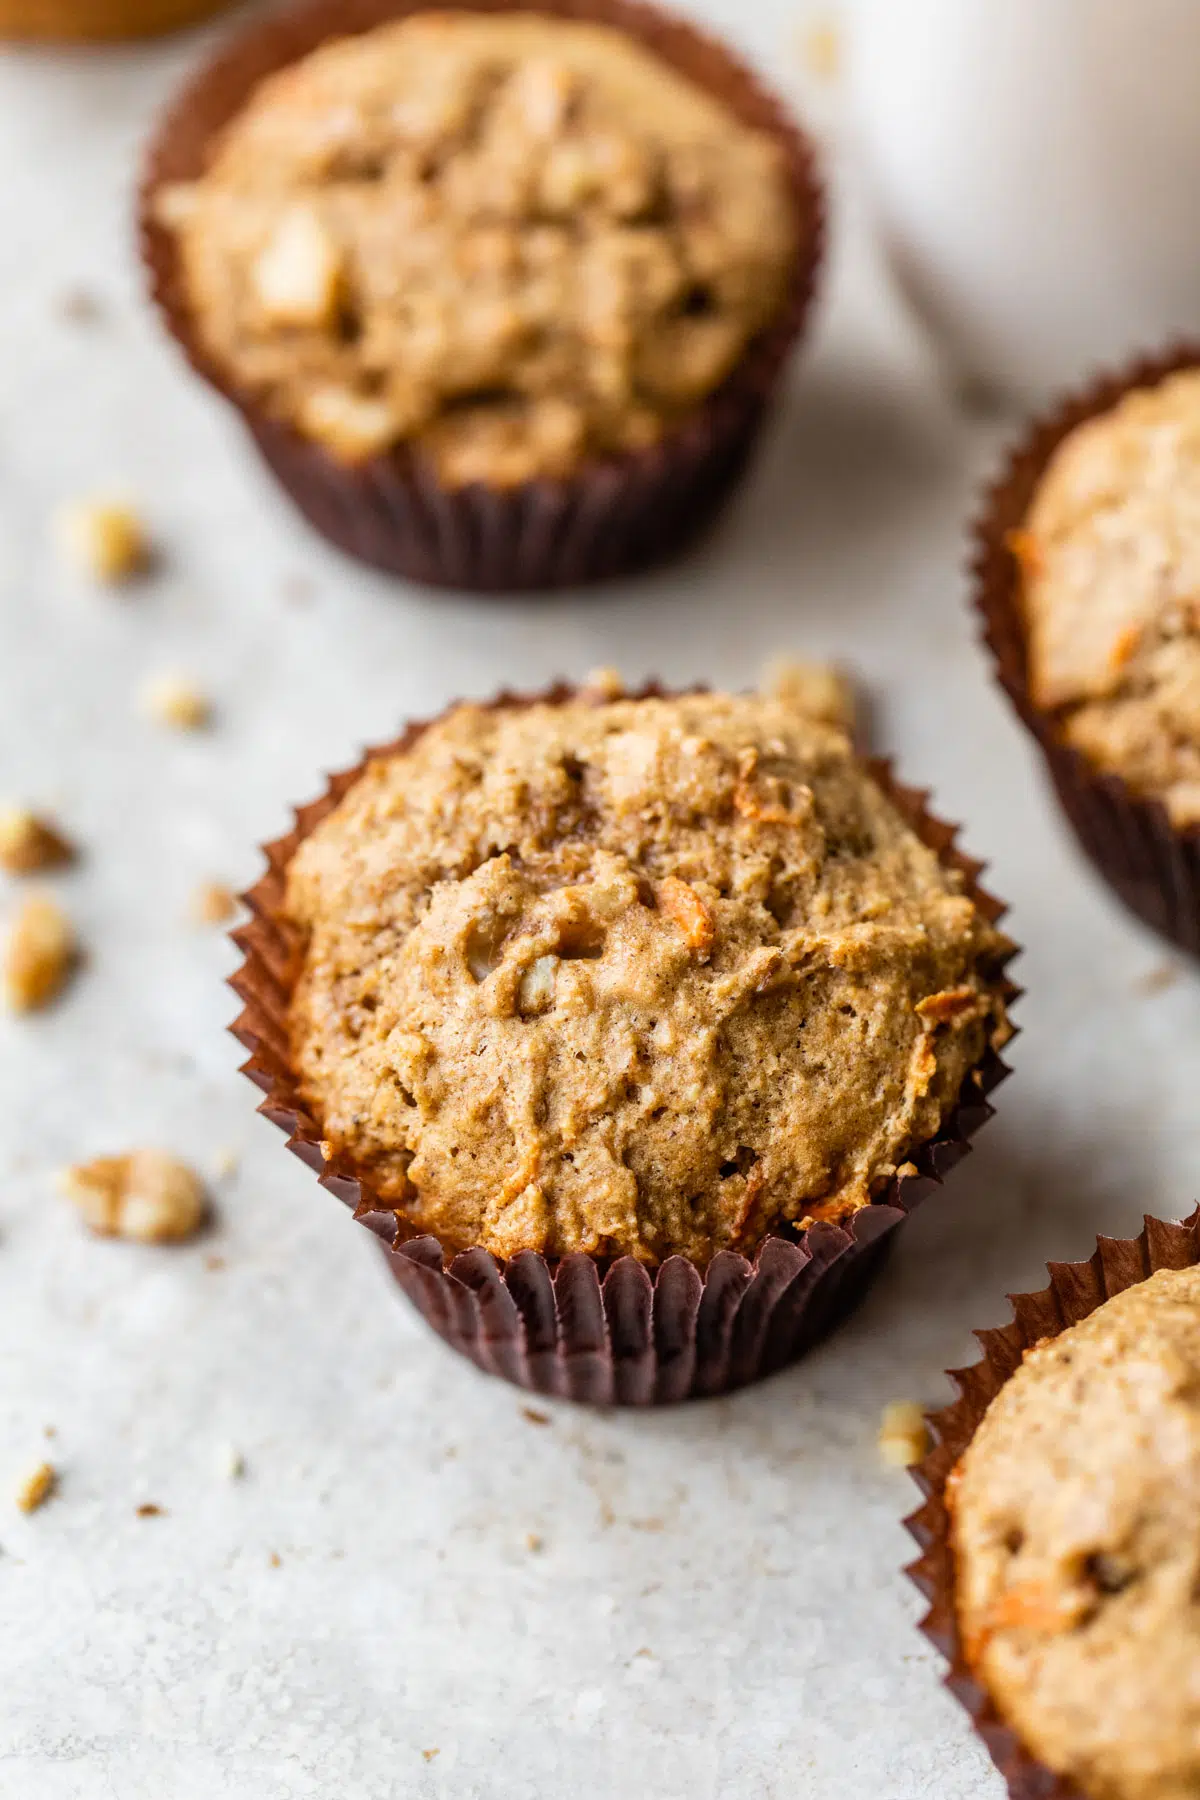 muffin filled with carrots and walnuts